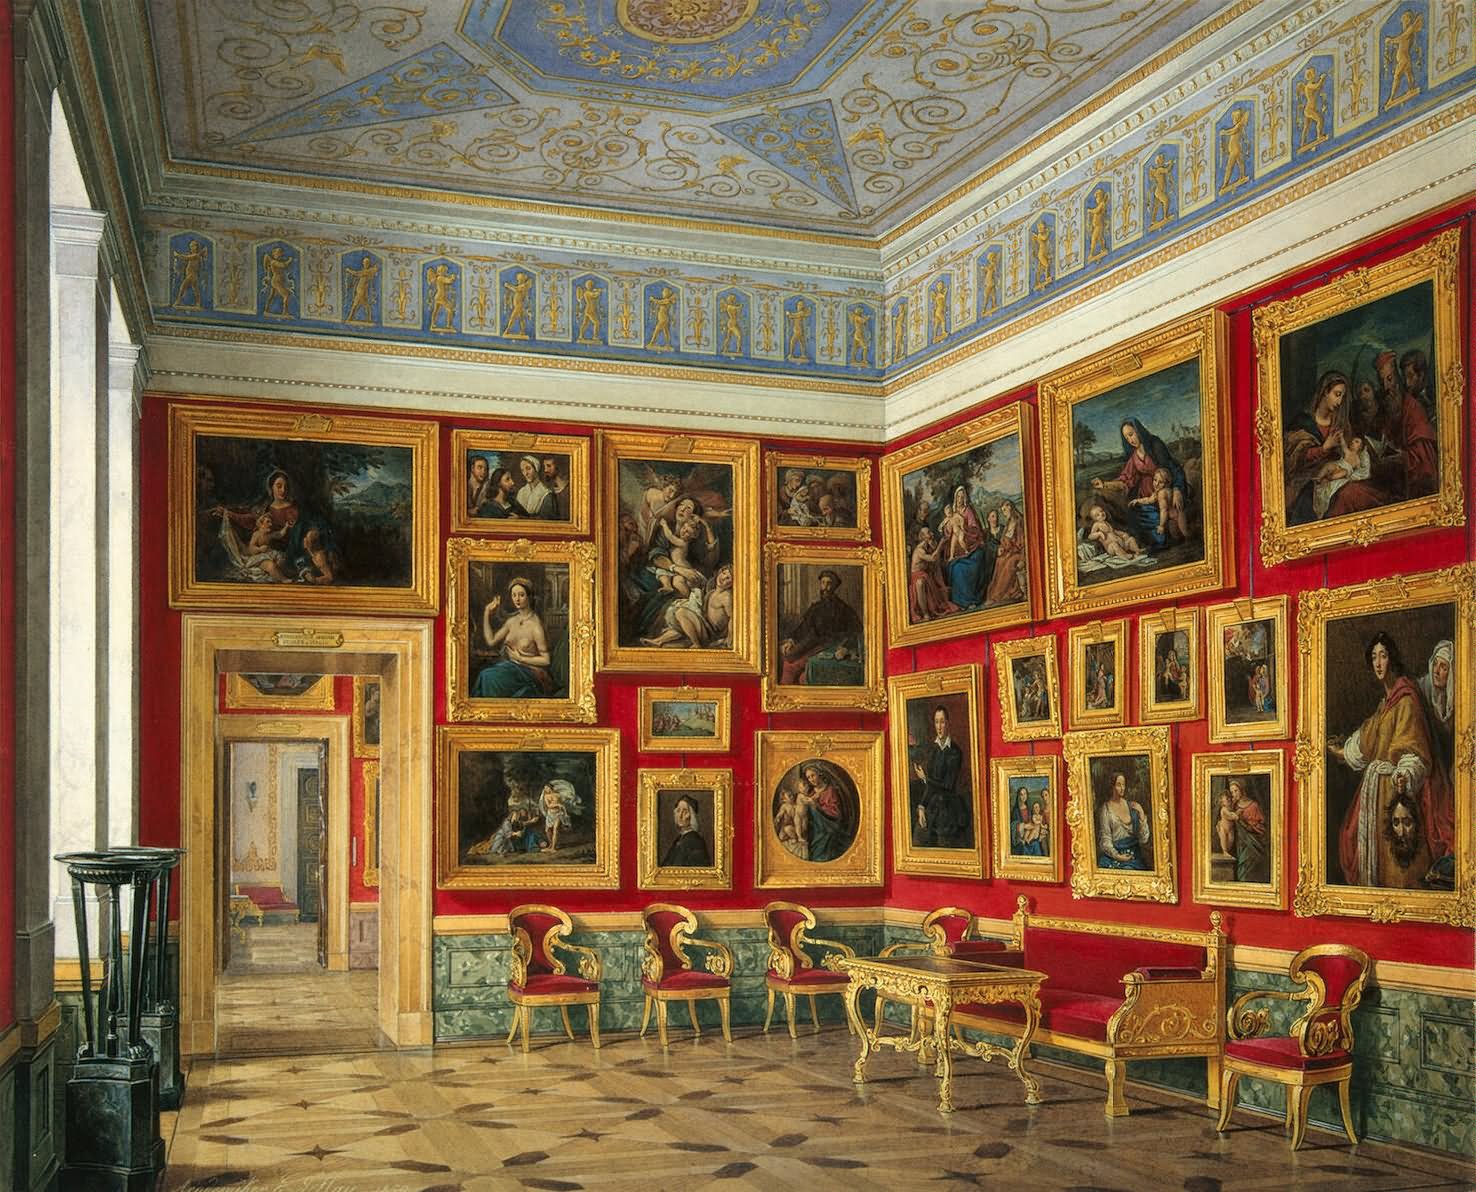 Italian Images Gallery Inside The Hermitage Museum, Russia